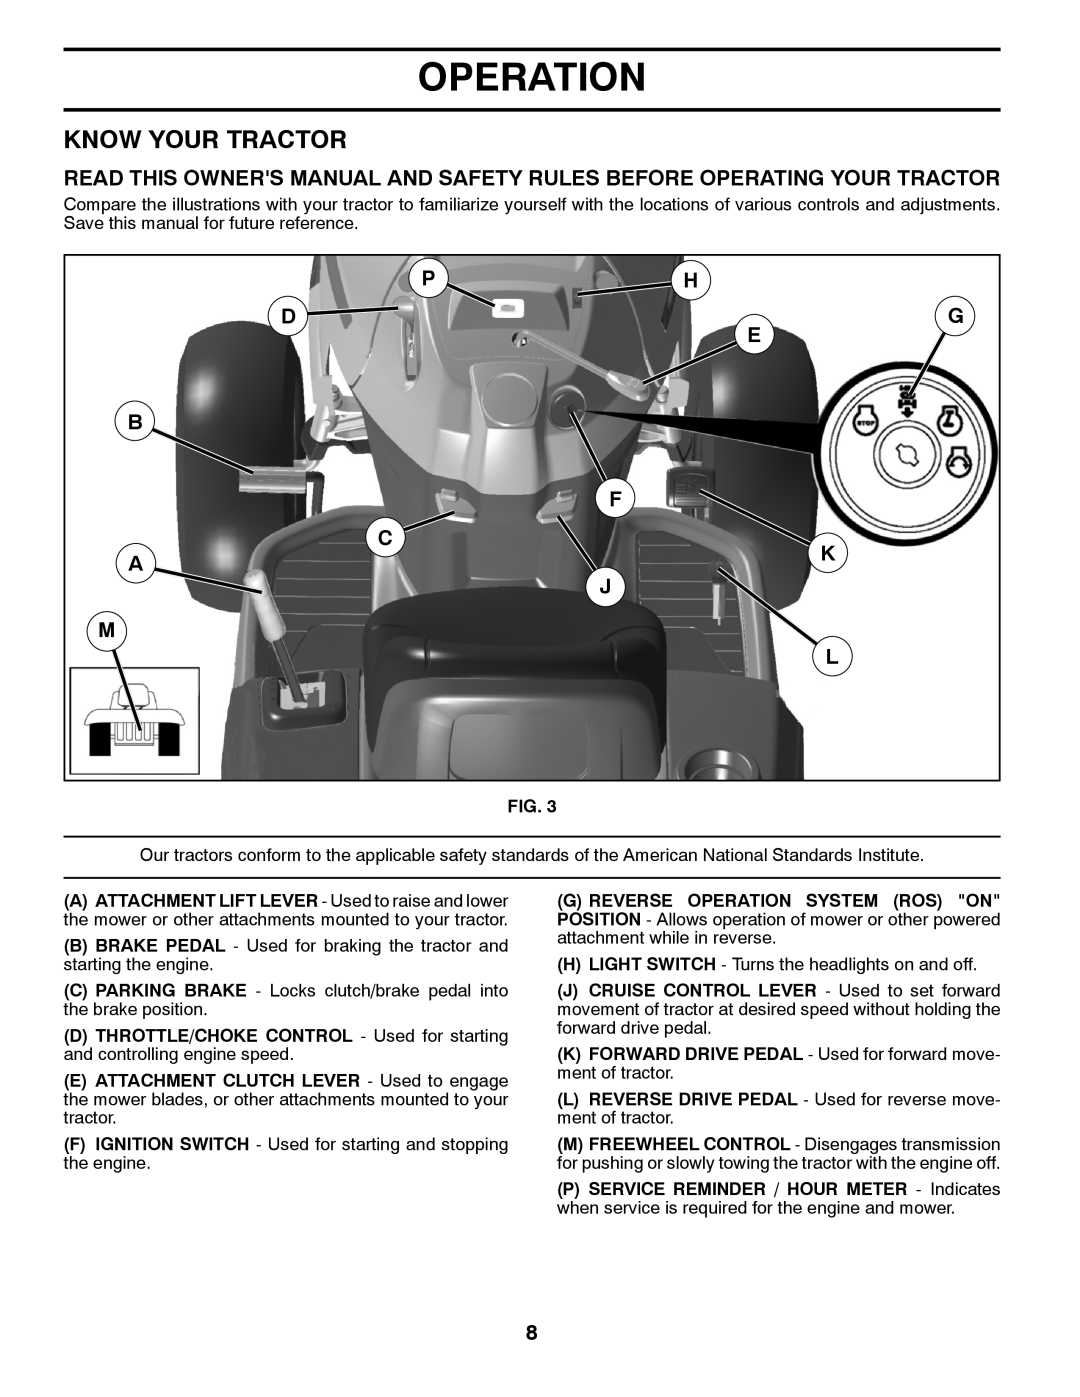 Husqvarna 96045000412 owner manual Know Your Tractor, Ph Dg E, Operation 